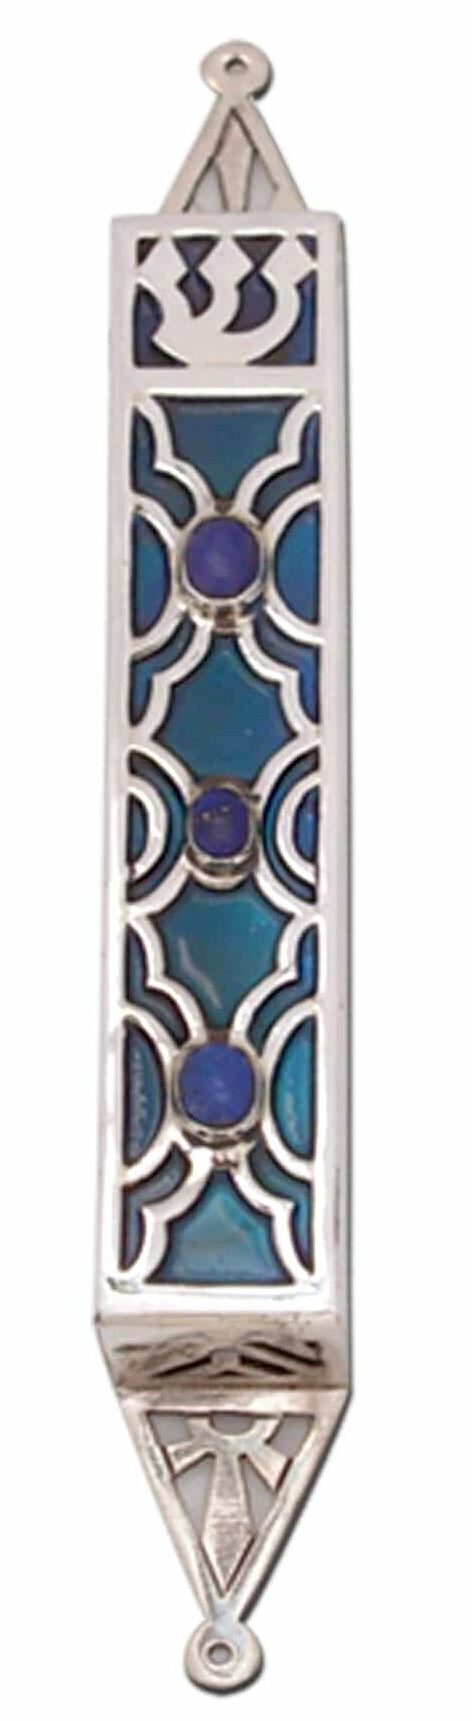 Colorful Sterling Silver Mezuzah Case With Natural Amethyst Stones